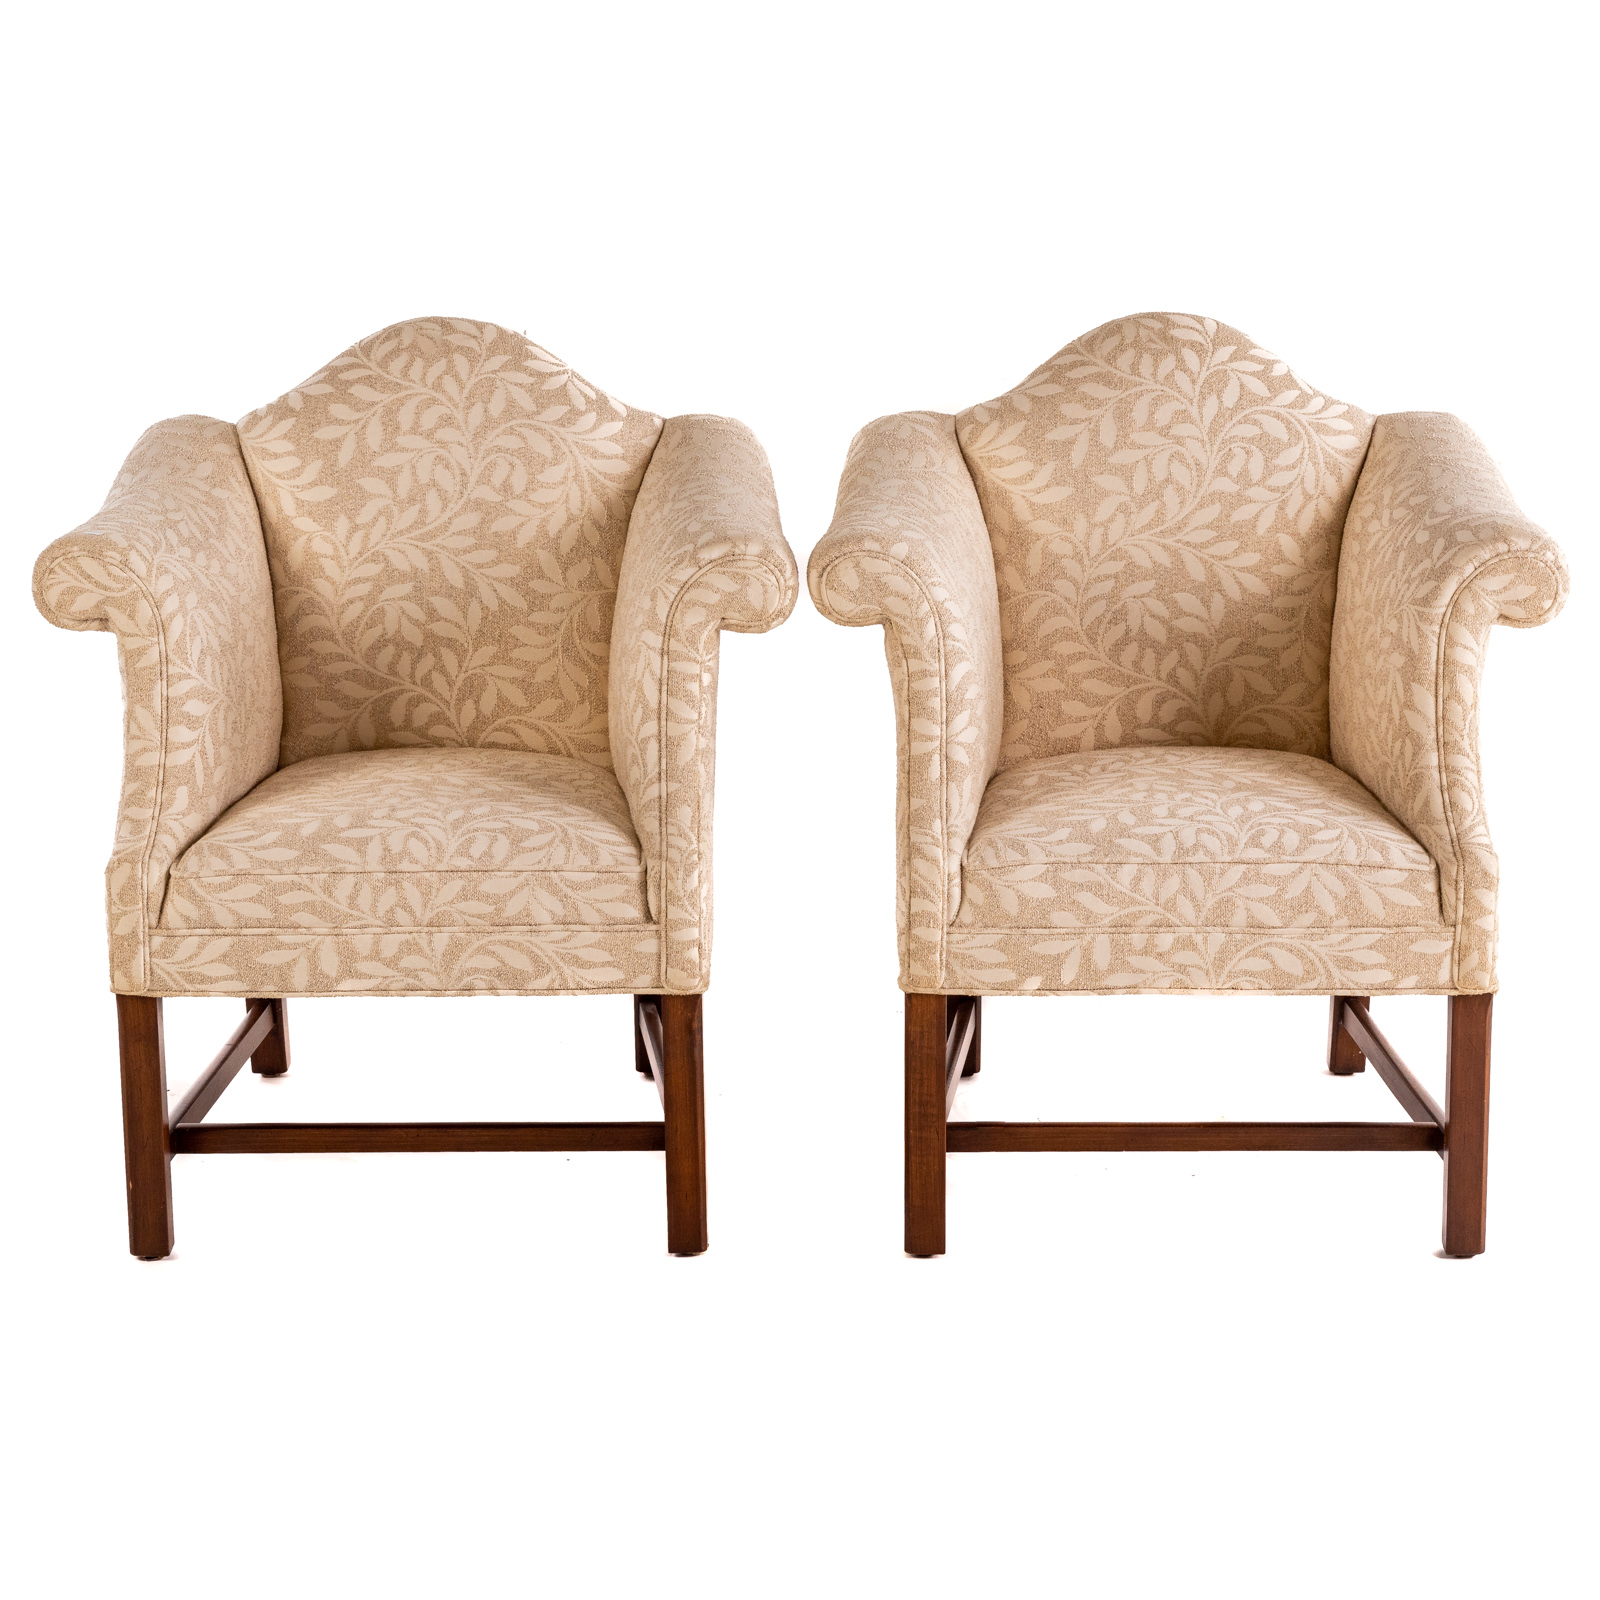 A PAIR OF UPHOLSTERED CHIPPENDALE 29e900